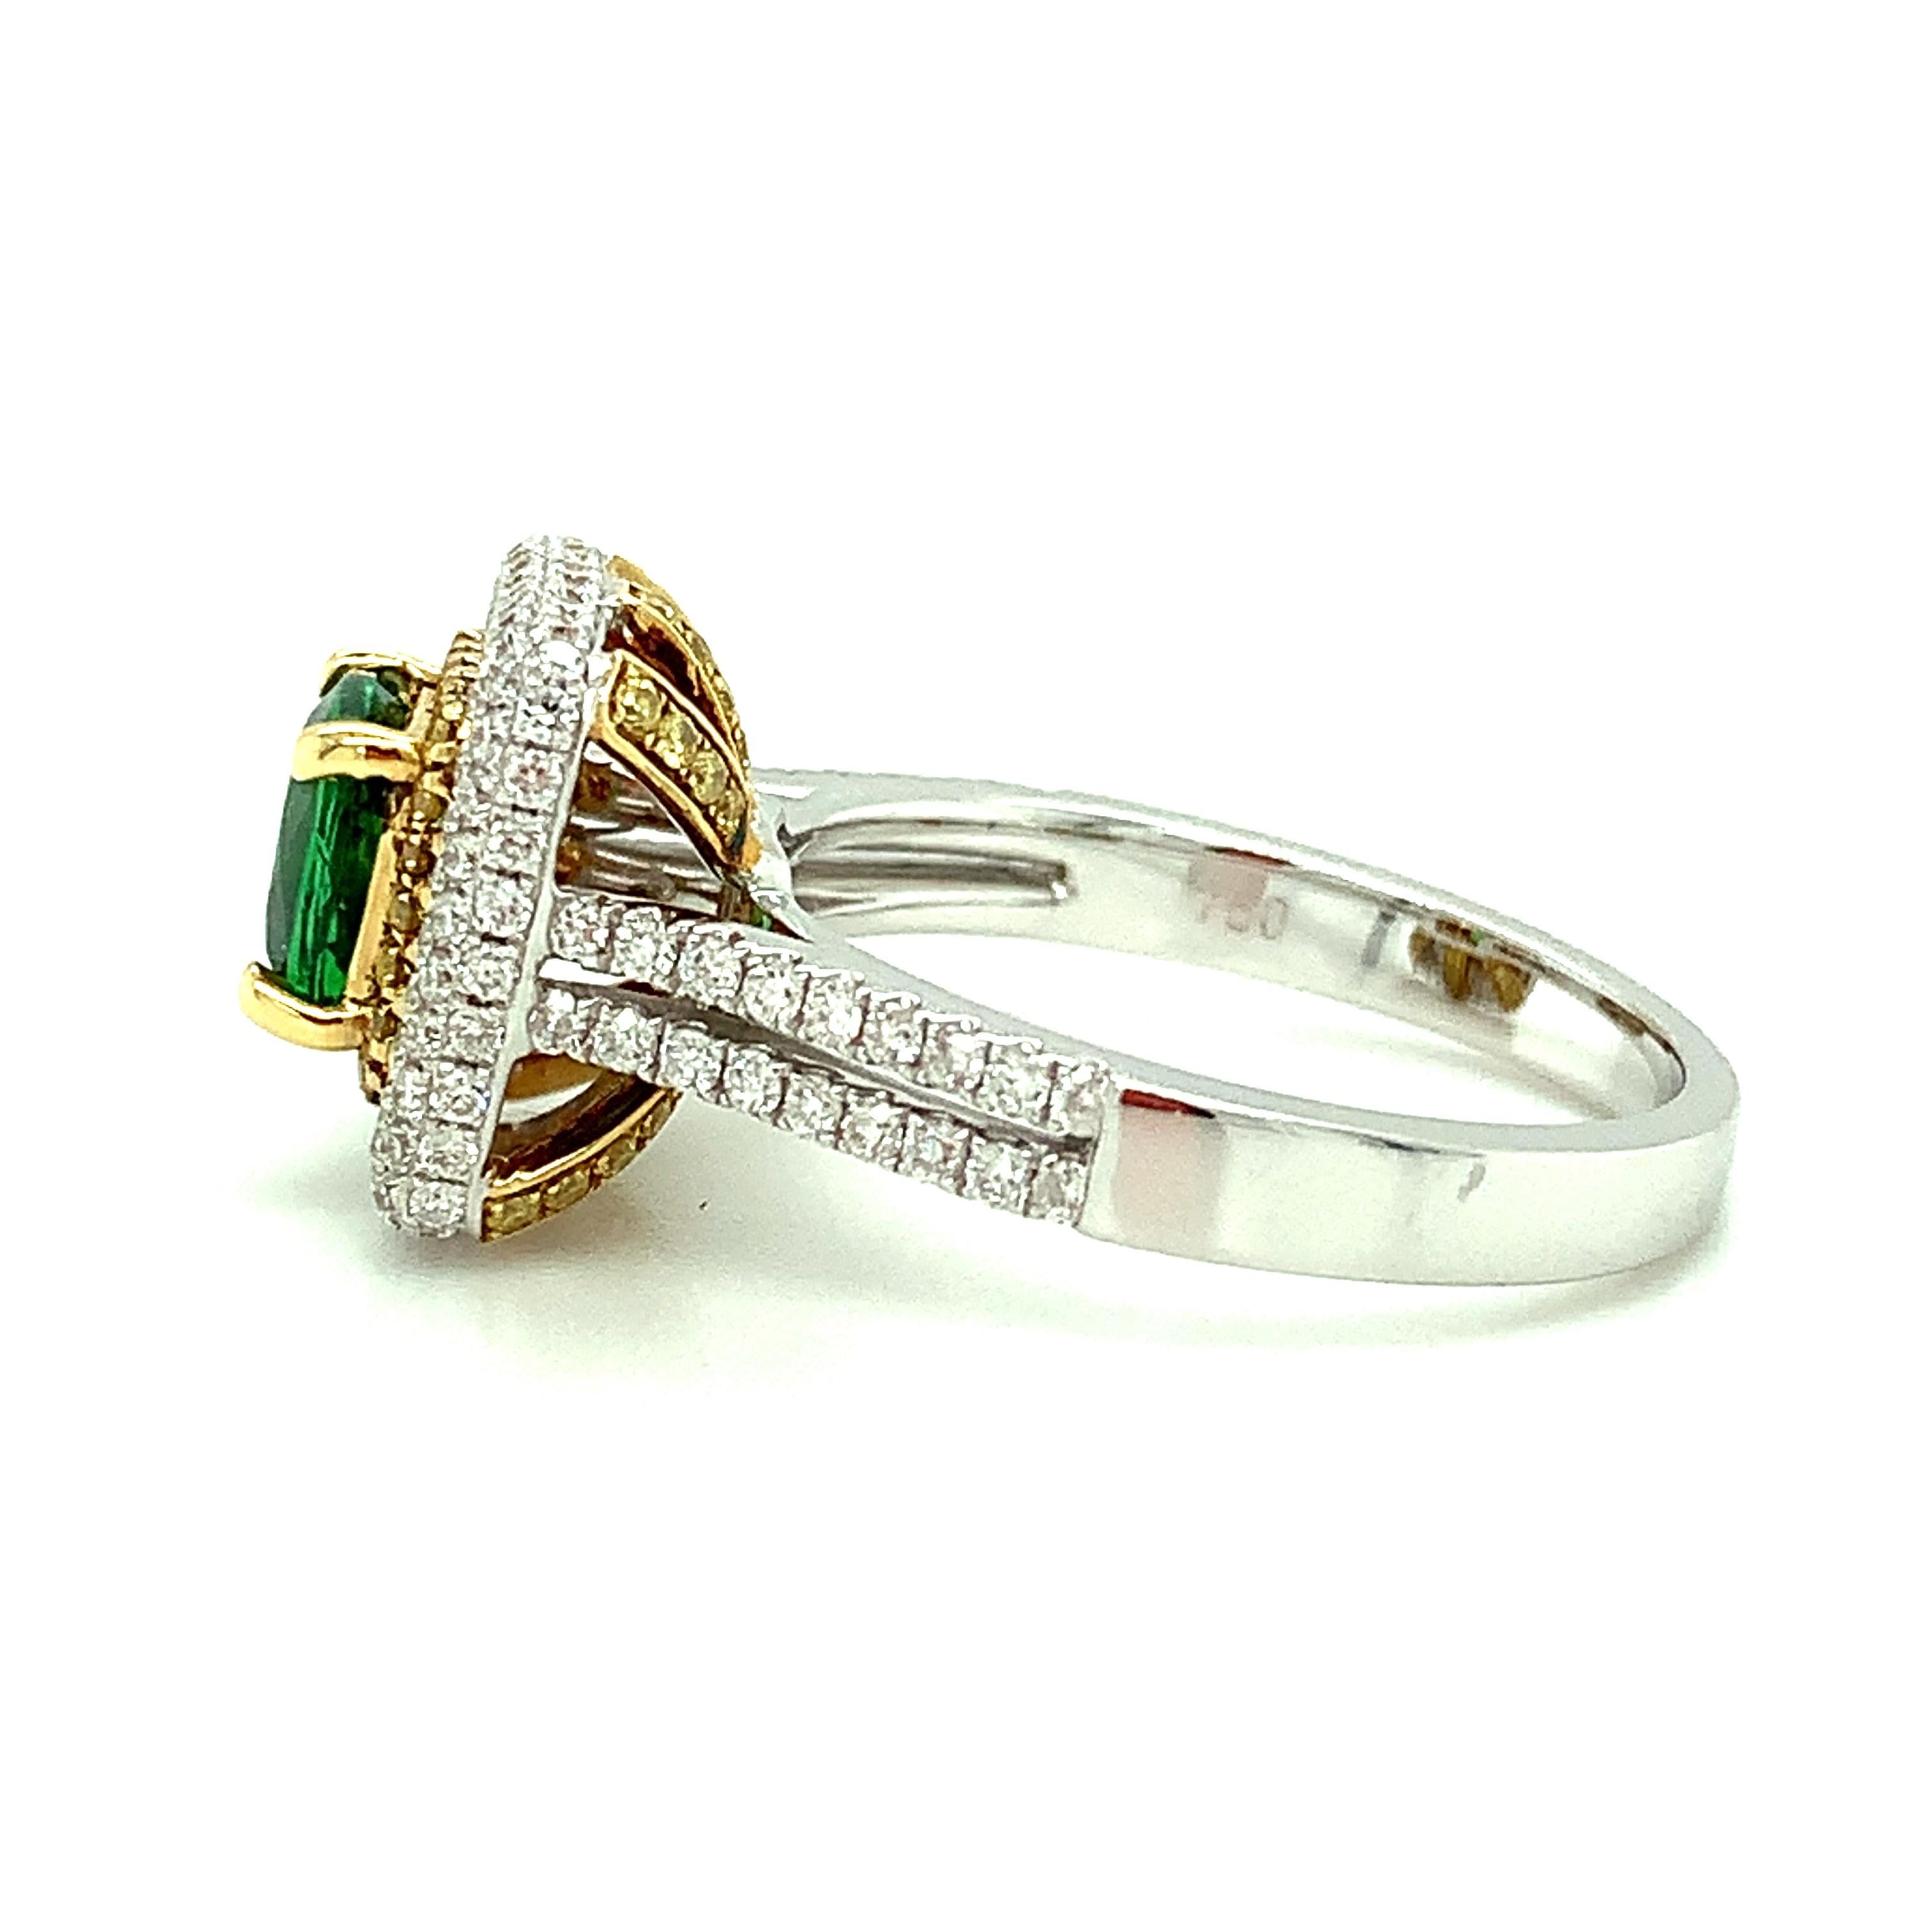 Tsavorite Garnet and Yellow Diamond Halo Cocktail Ring in Yellow and White Gold For Sale 2